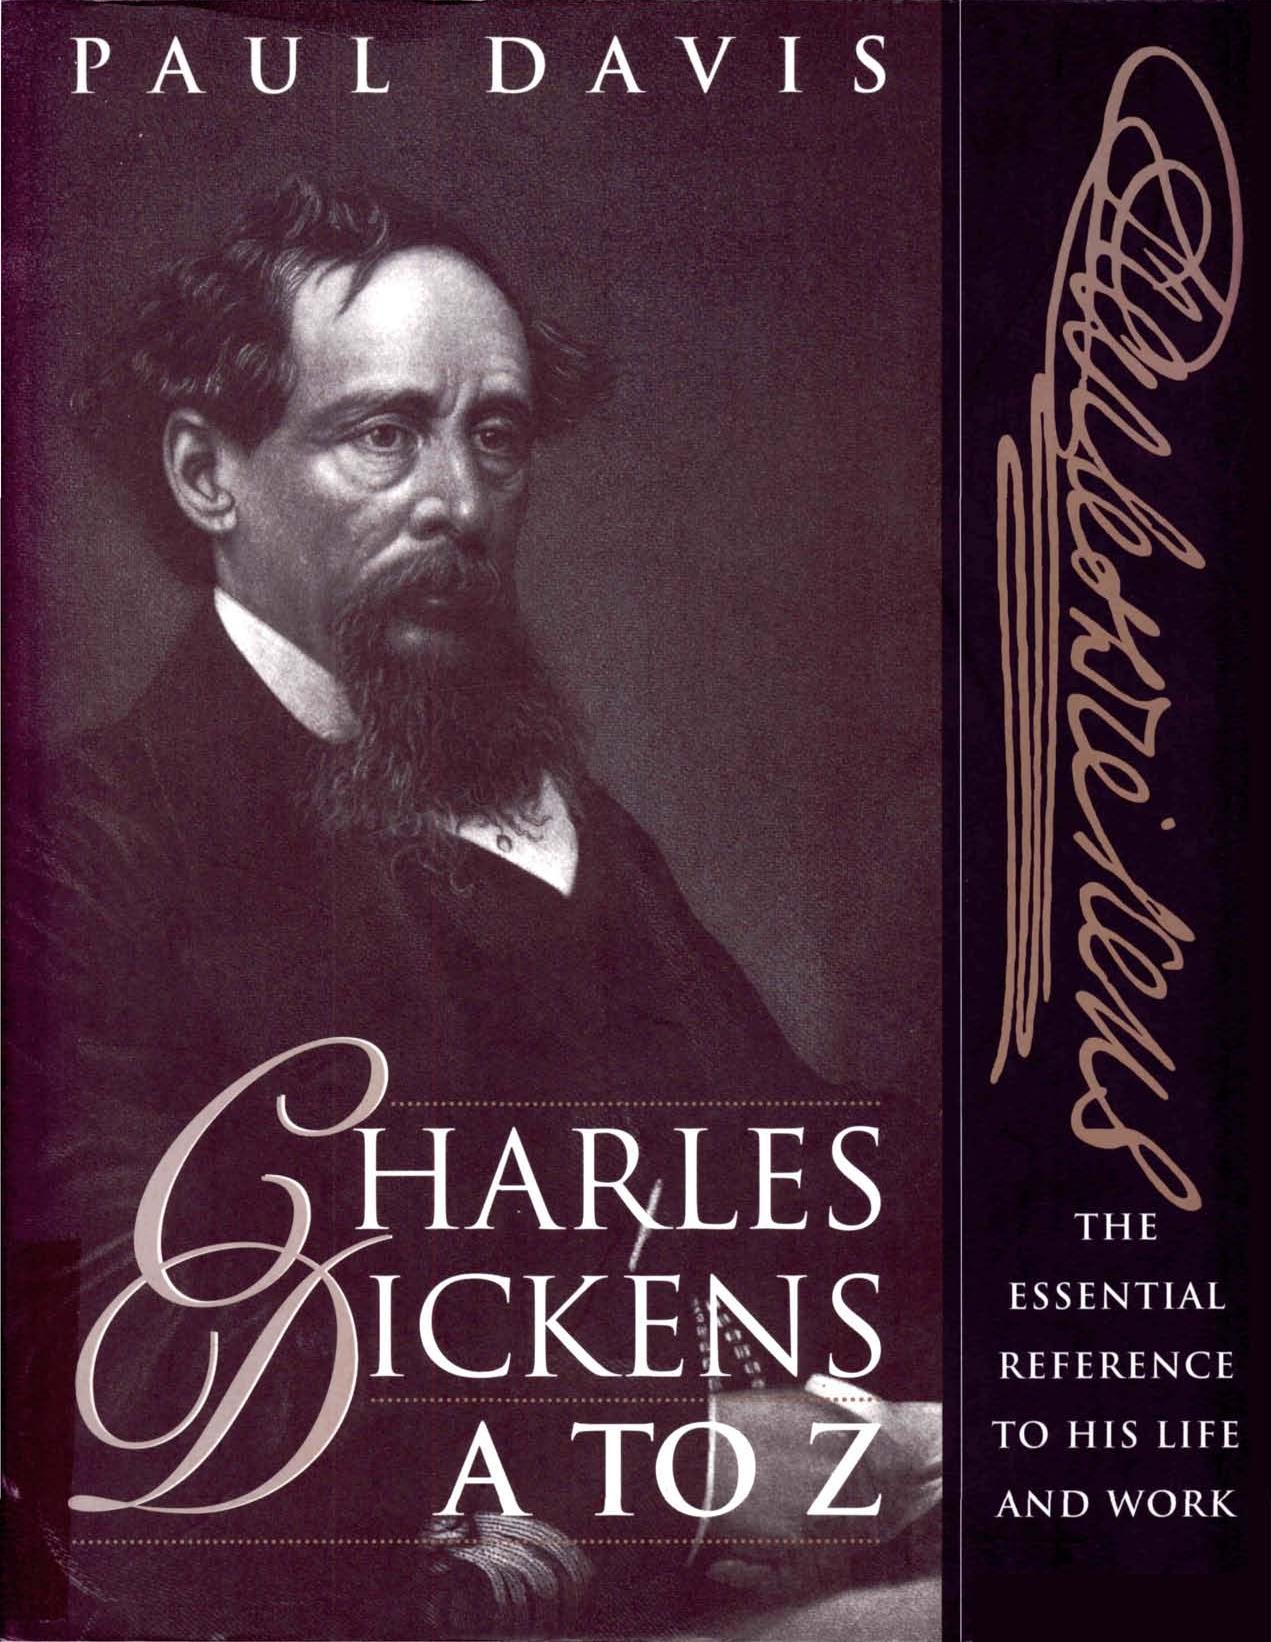 Charles Dickens a to Z: The Essential Reference to His Life and Work